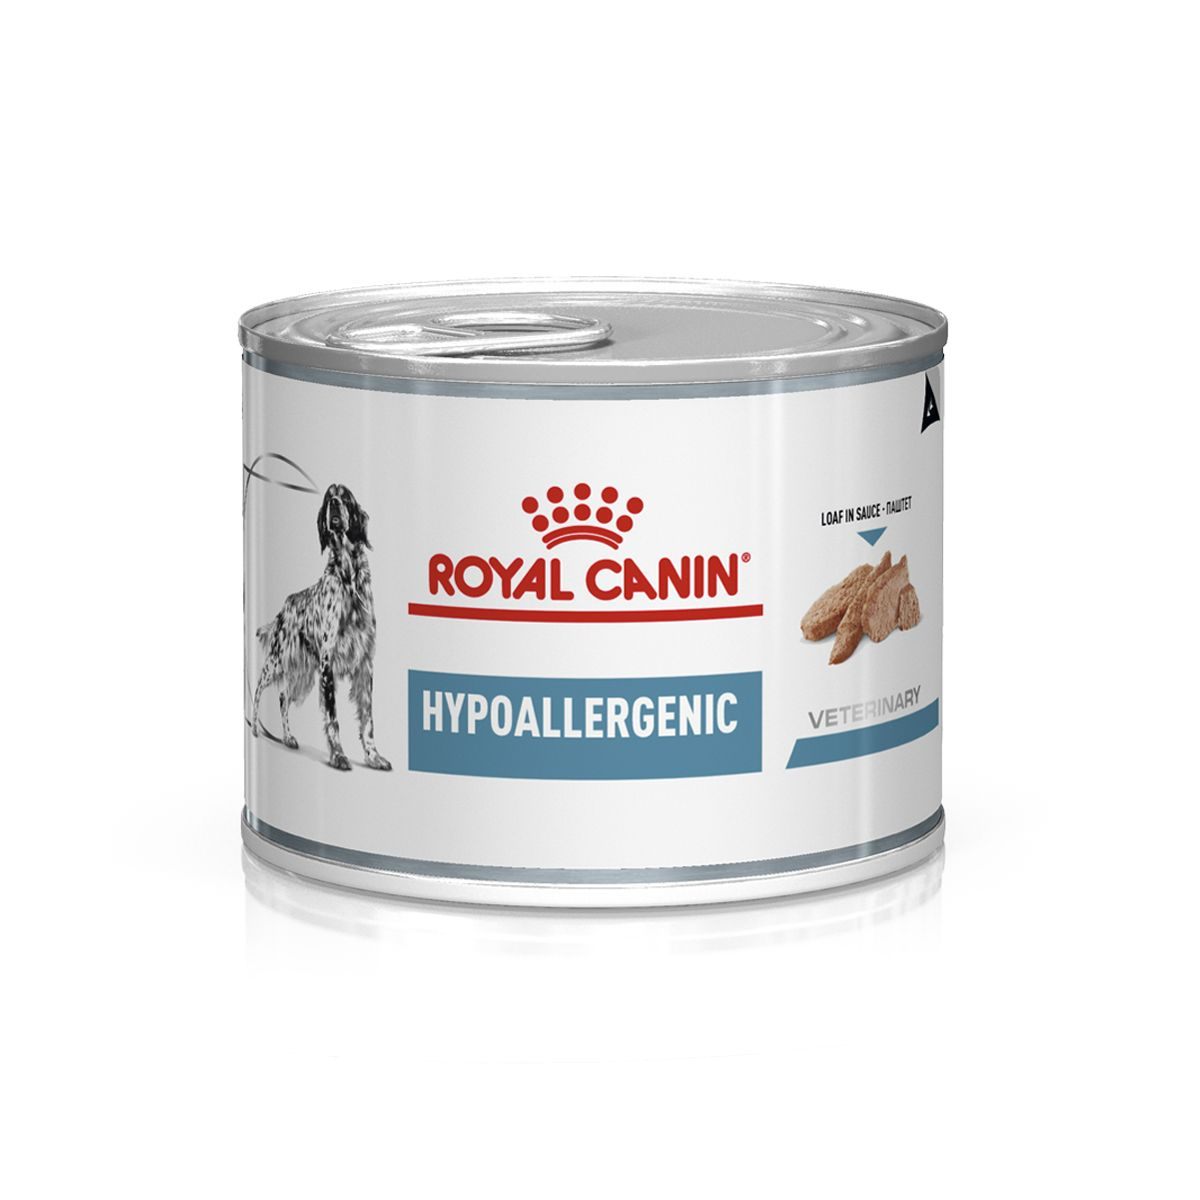 Hypoallergenic wet | Royal Canin